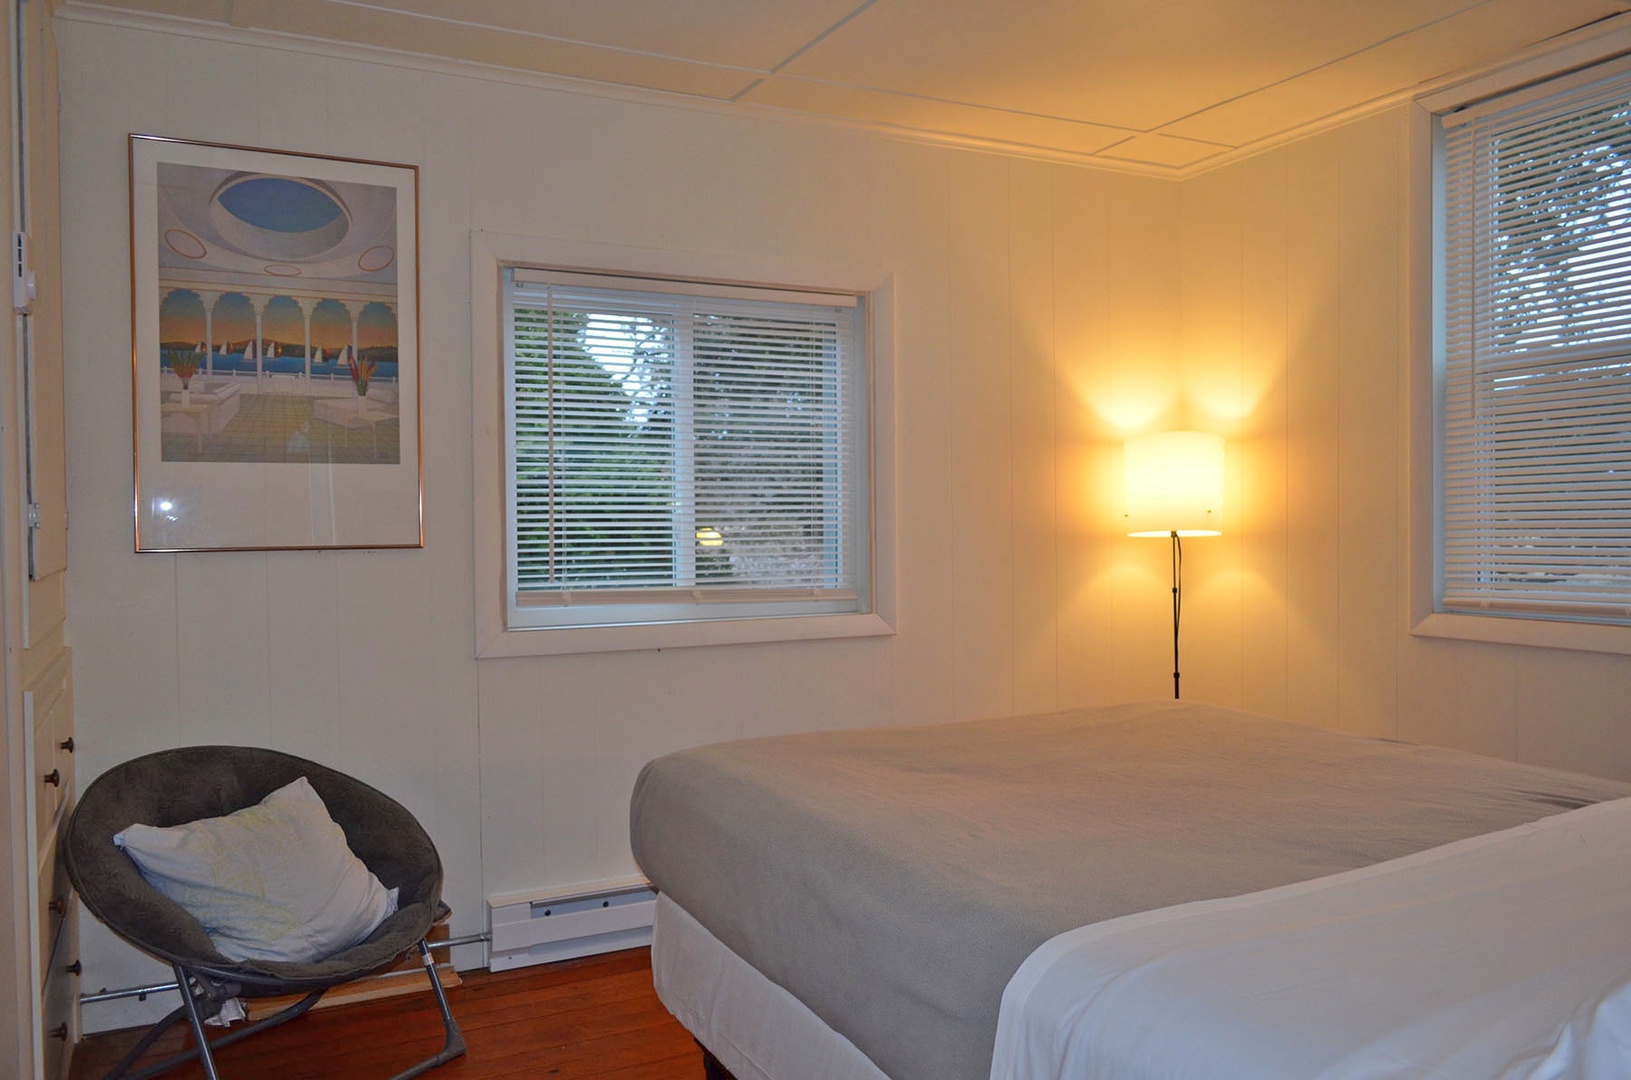 BR 1 offers views of the marsh and has a Queen bed.